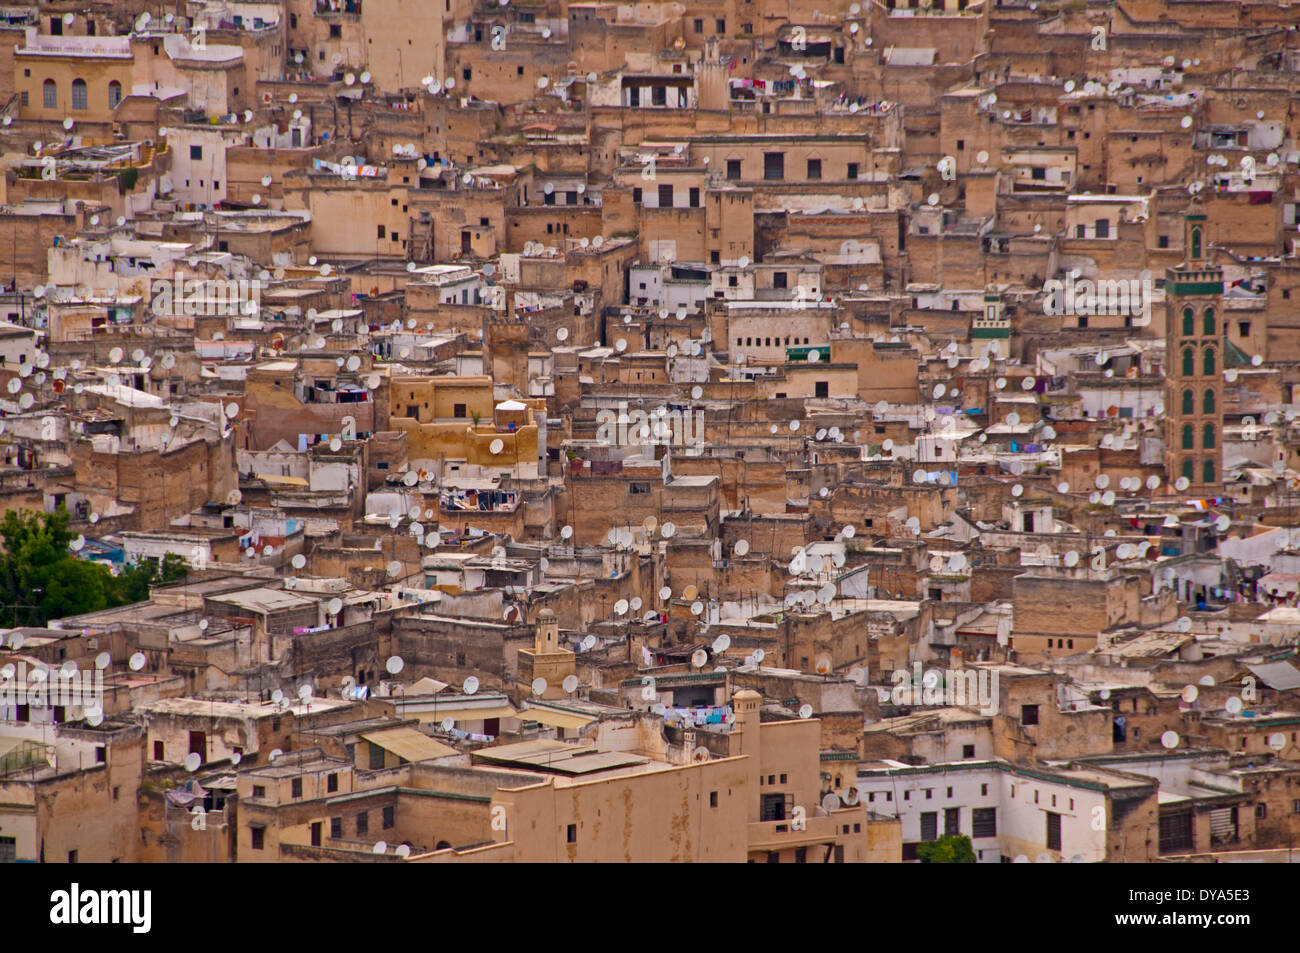 Africa, North Africa, Old Town, fez, houses, homes, Morocco, Medina, satellite dishes, dish aerial, roofs, Stock Photo